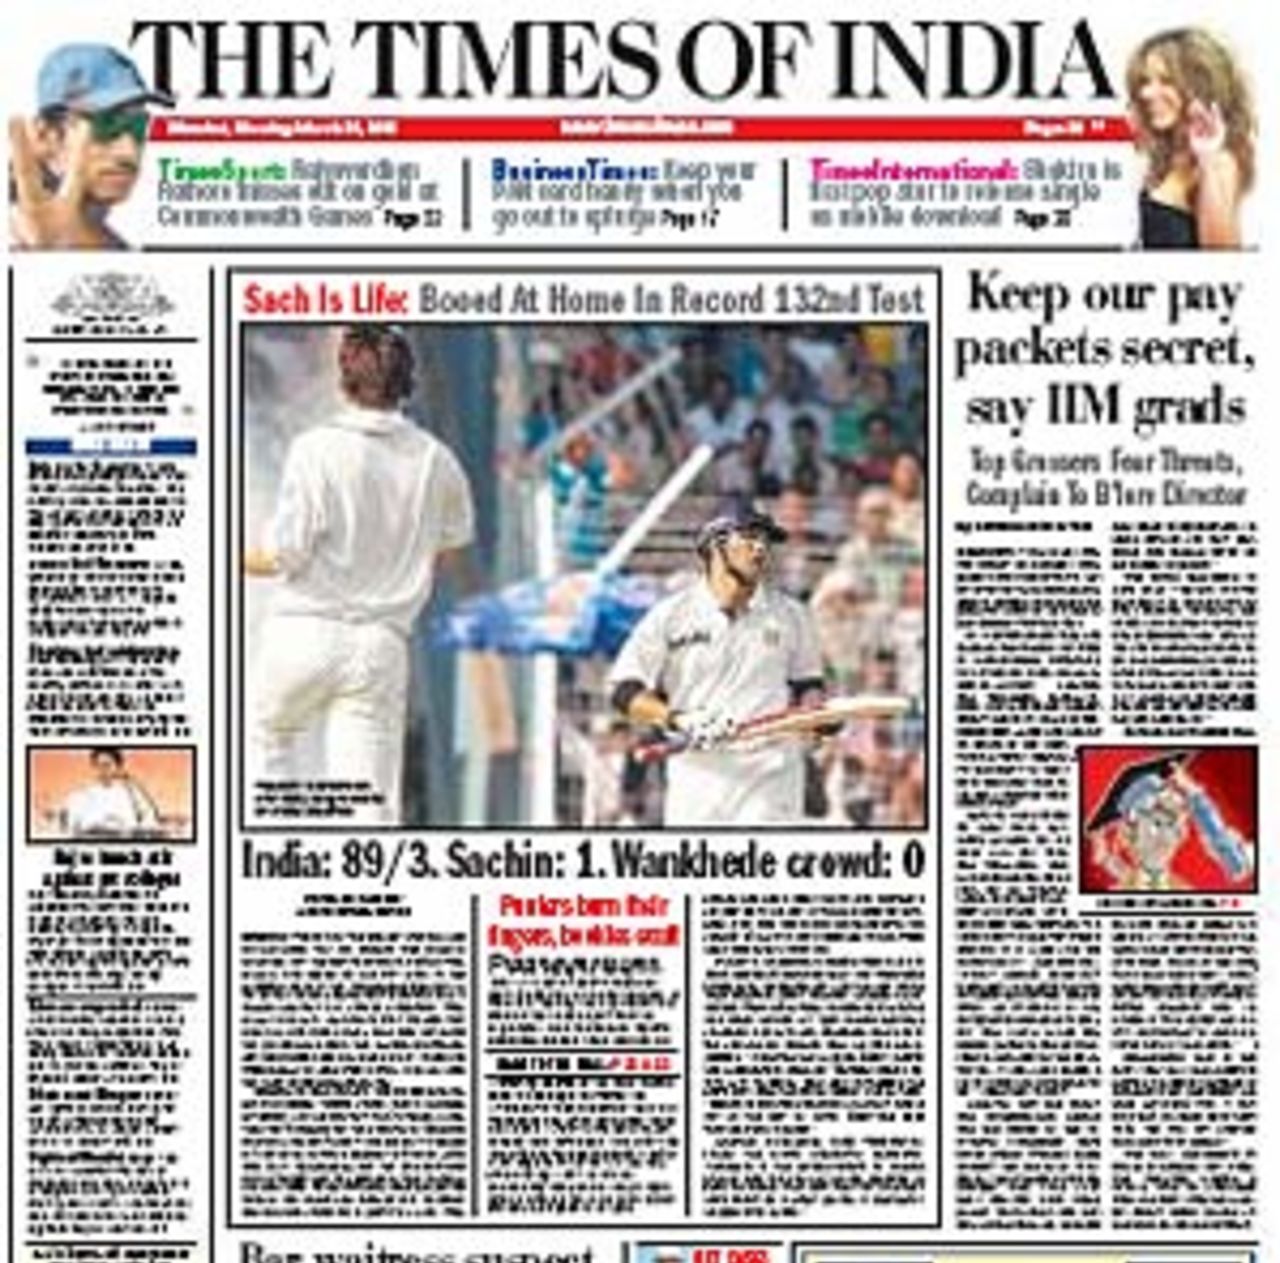 Front page of the <I>Times of India</I> re Sachin Tendulkar being booed, March 20, 2006